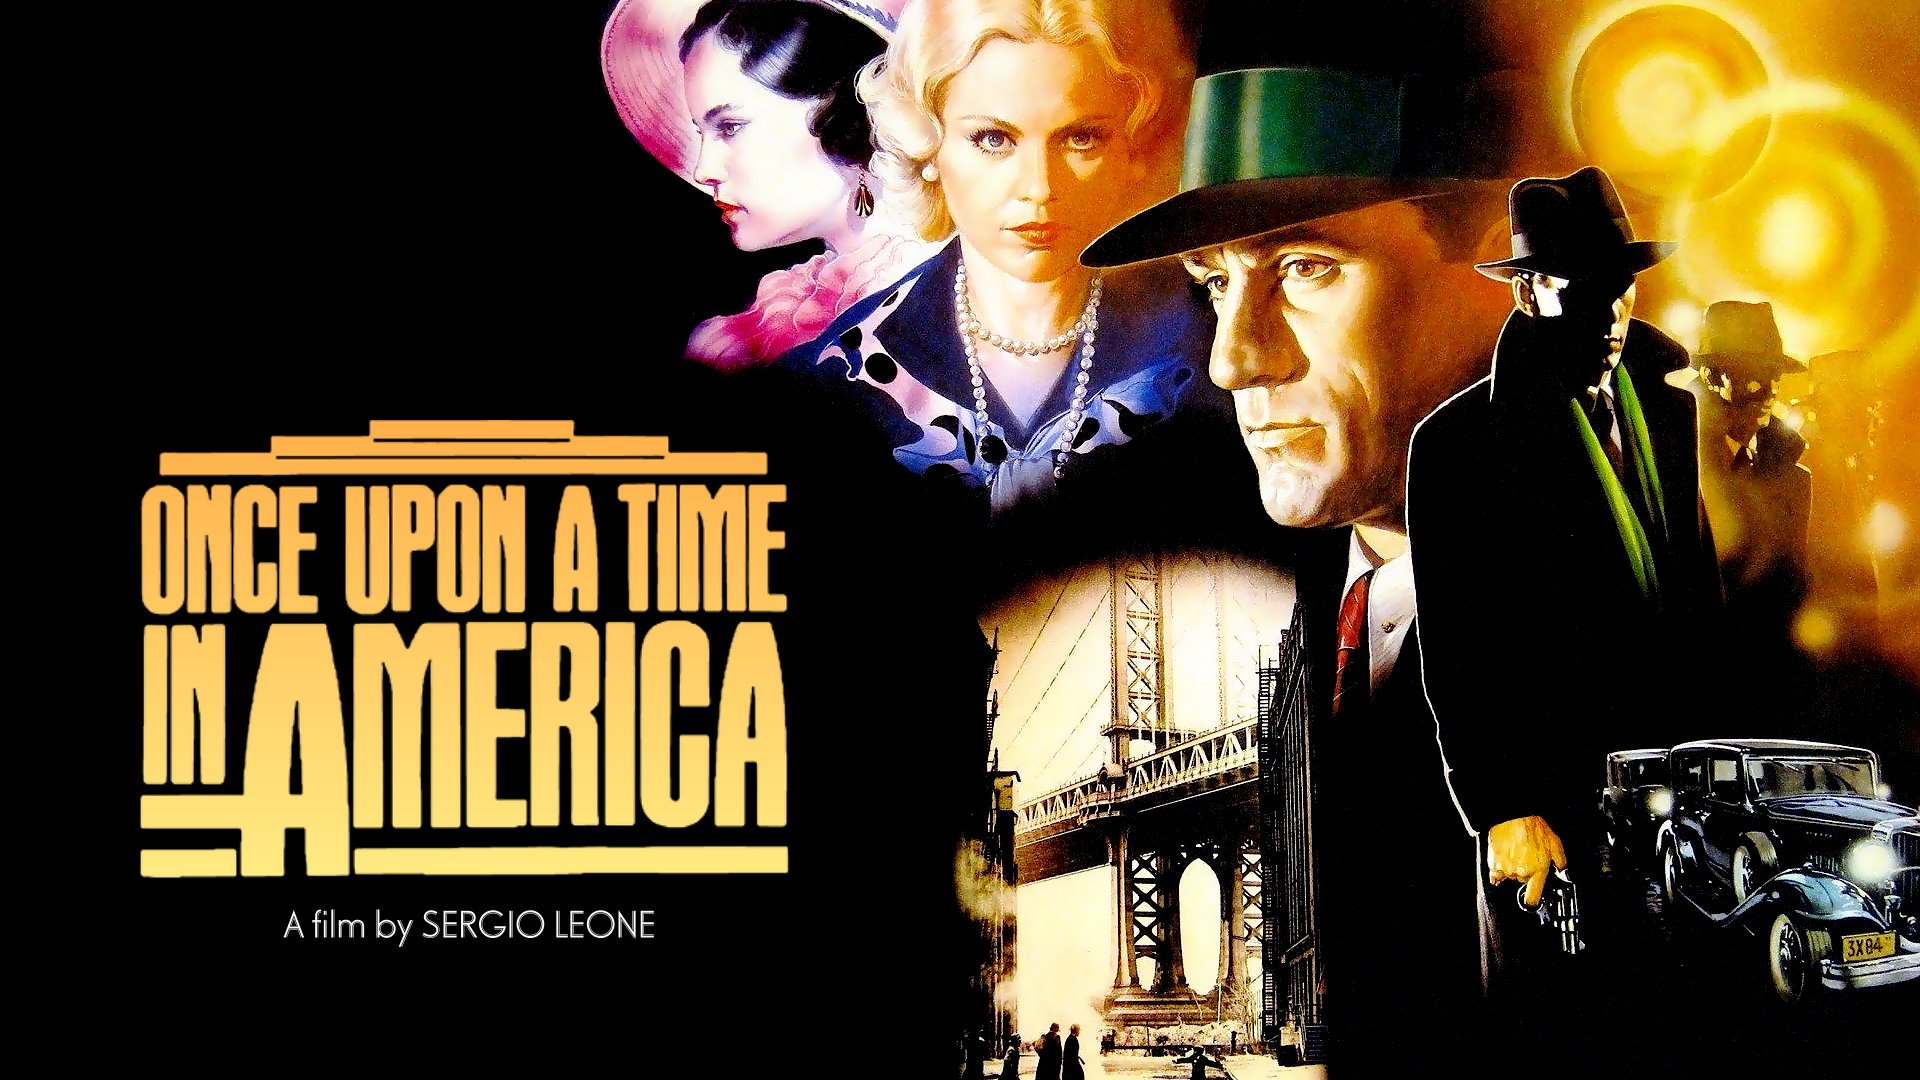 48-facts-about-the-movie-once-upon-a-time-in-america